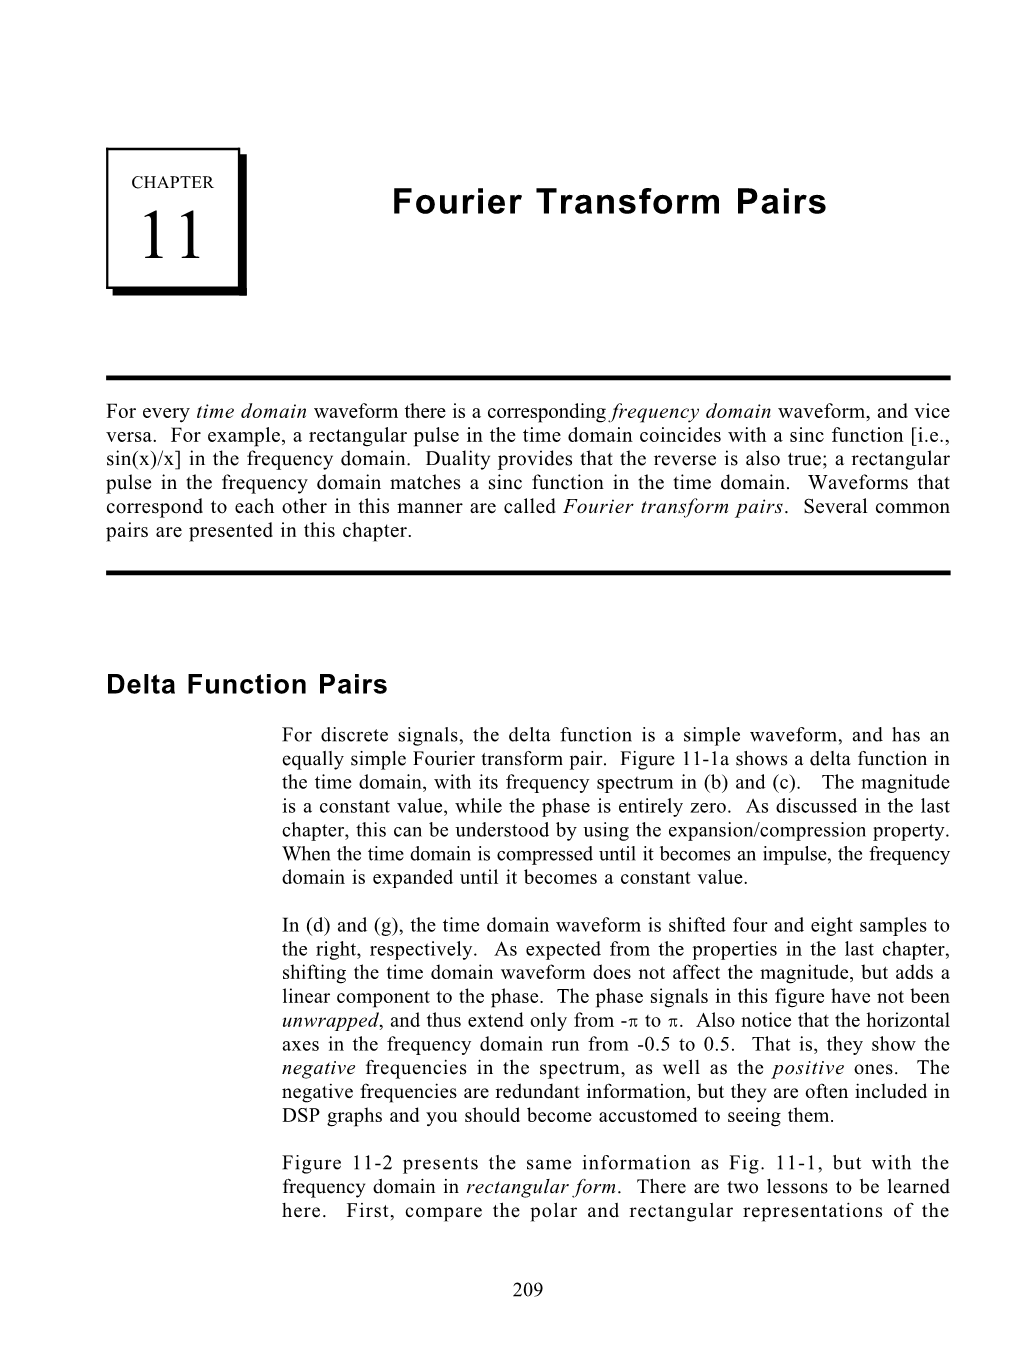 Chapter 11: Fourier Transform Pairs